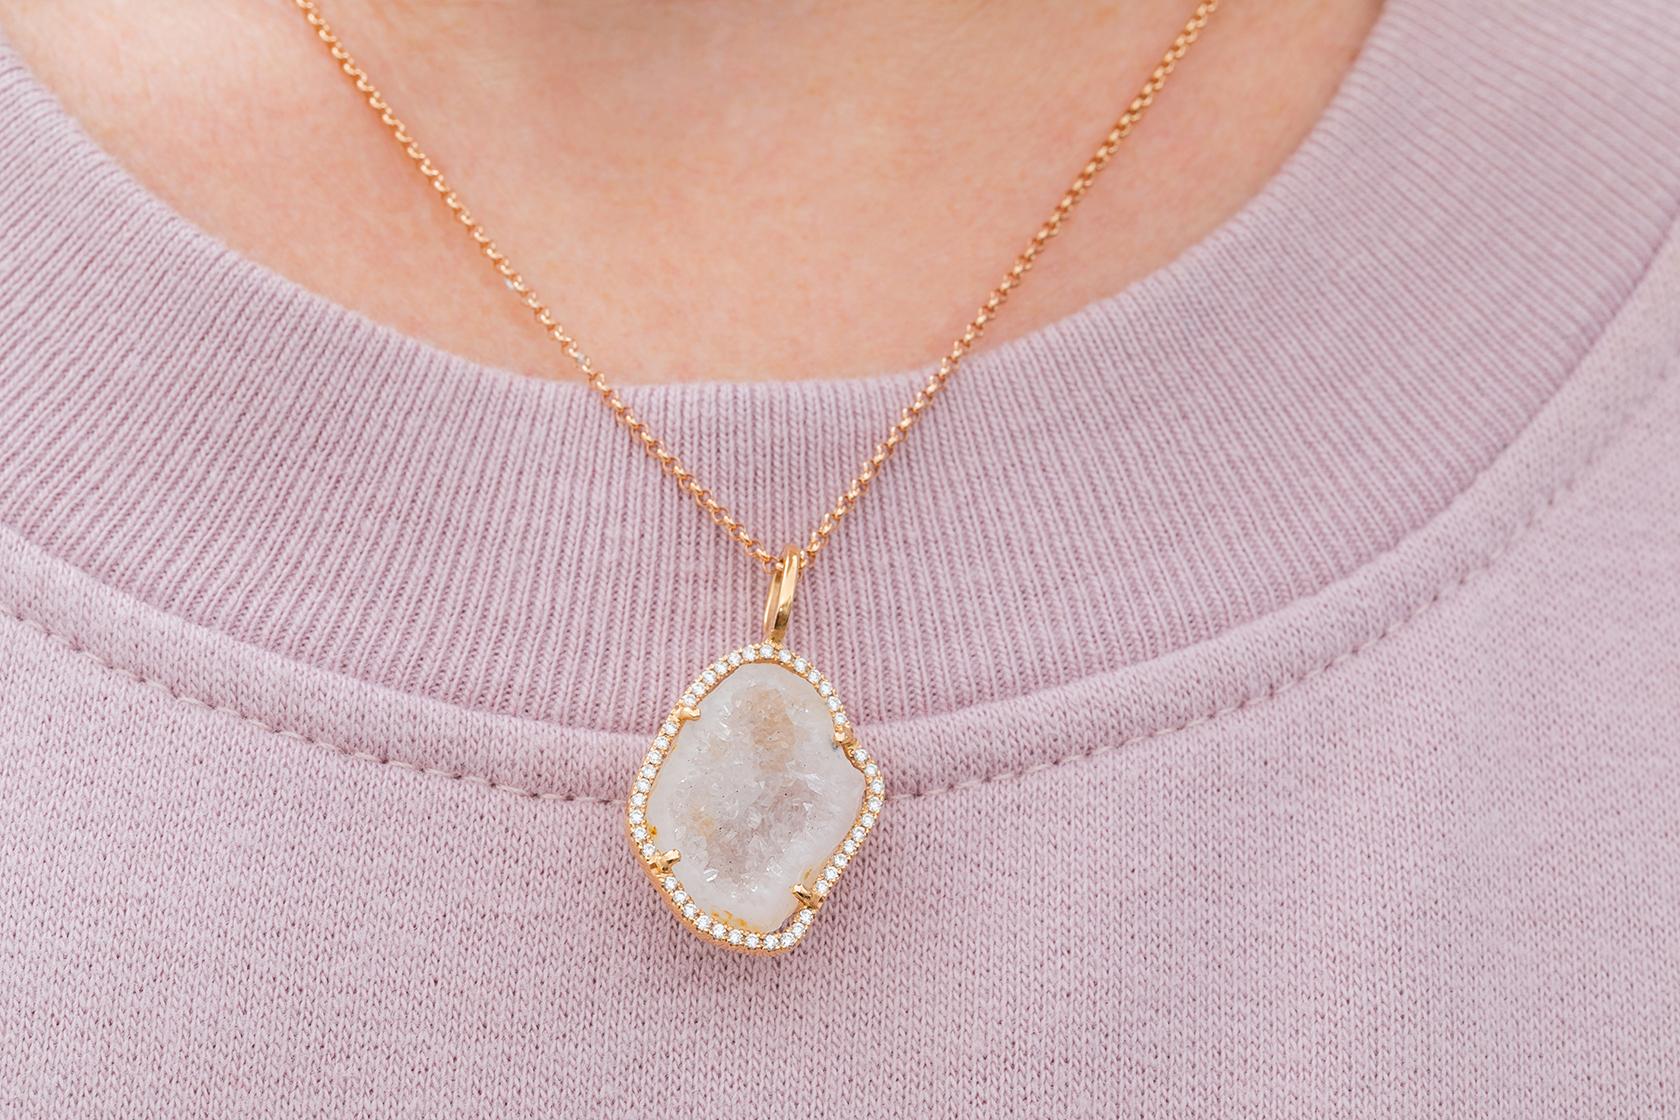 This 18 k rose gold white/yellow agate geode pendant has 0.26 ct of dazzling diamonds.
This is the perfect gift for yourself or a special person.
The chain is included and is 45 cm and adjustable with a sliding ball system.